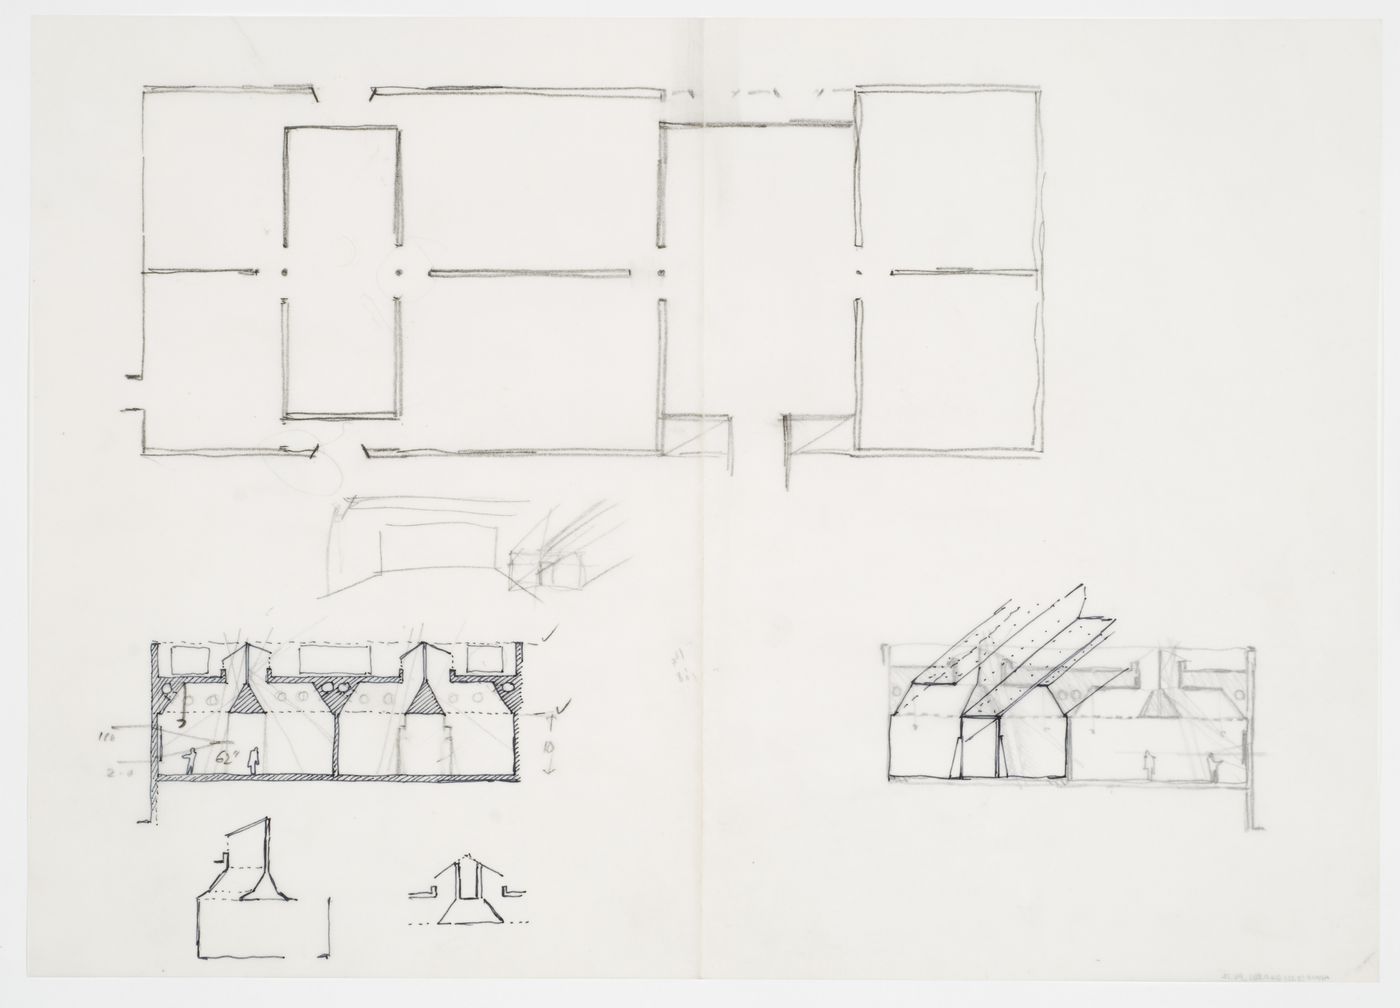 Clore Gallery, London, England: plan, sections and details